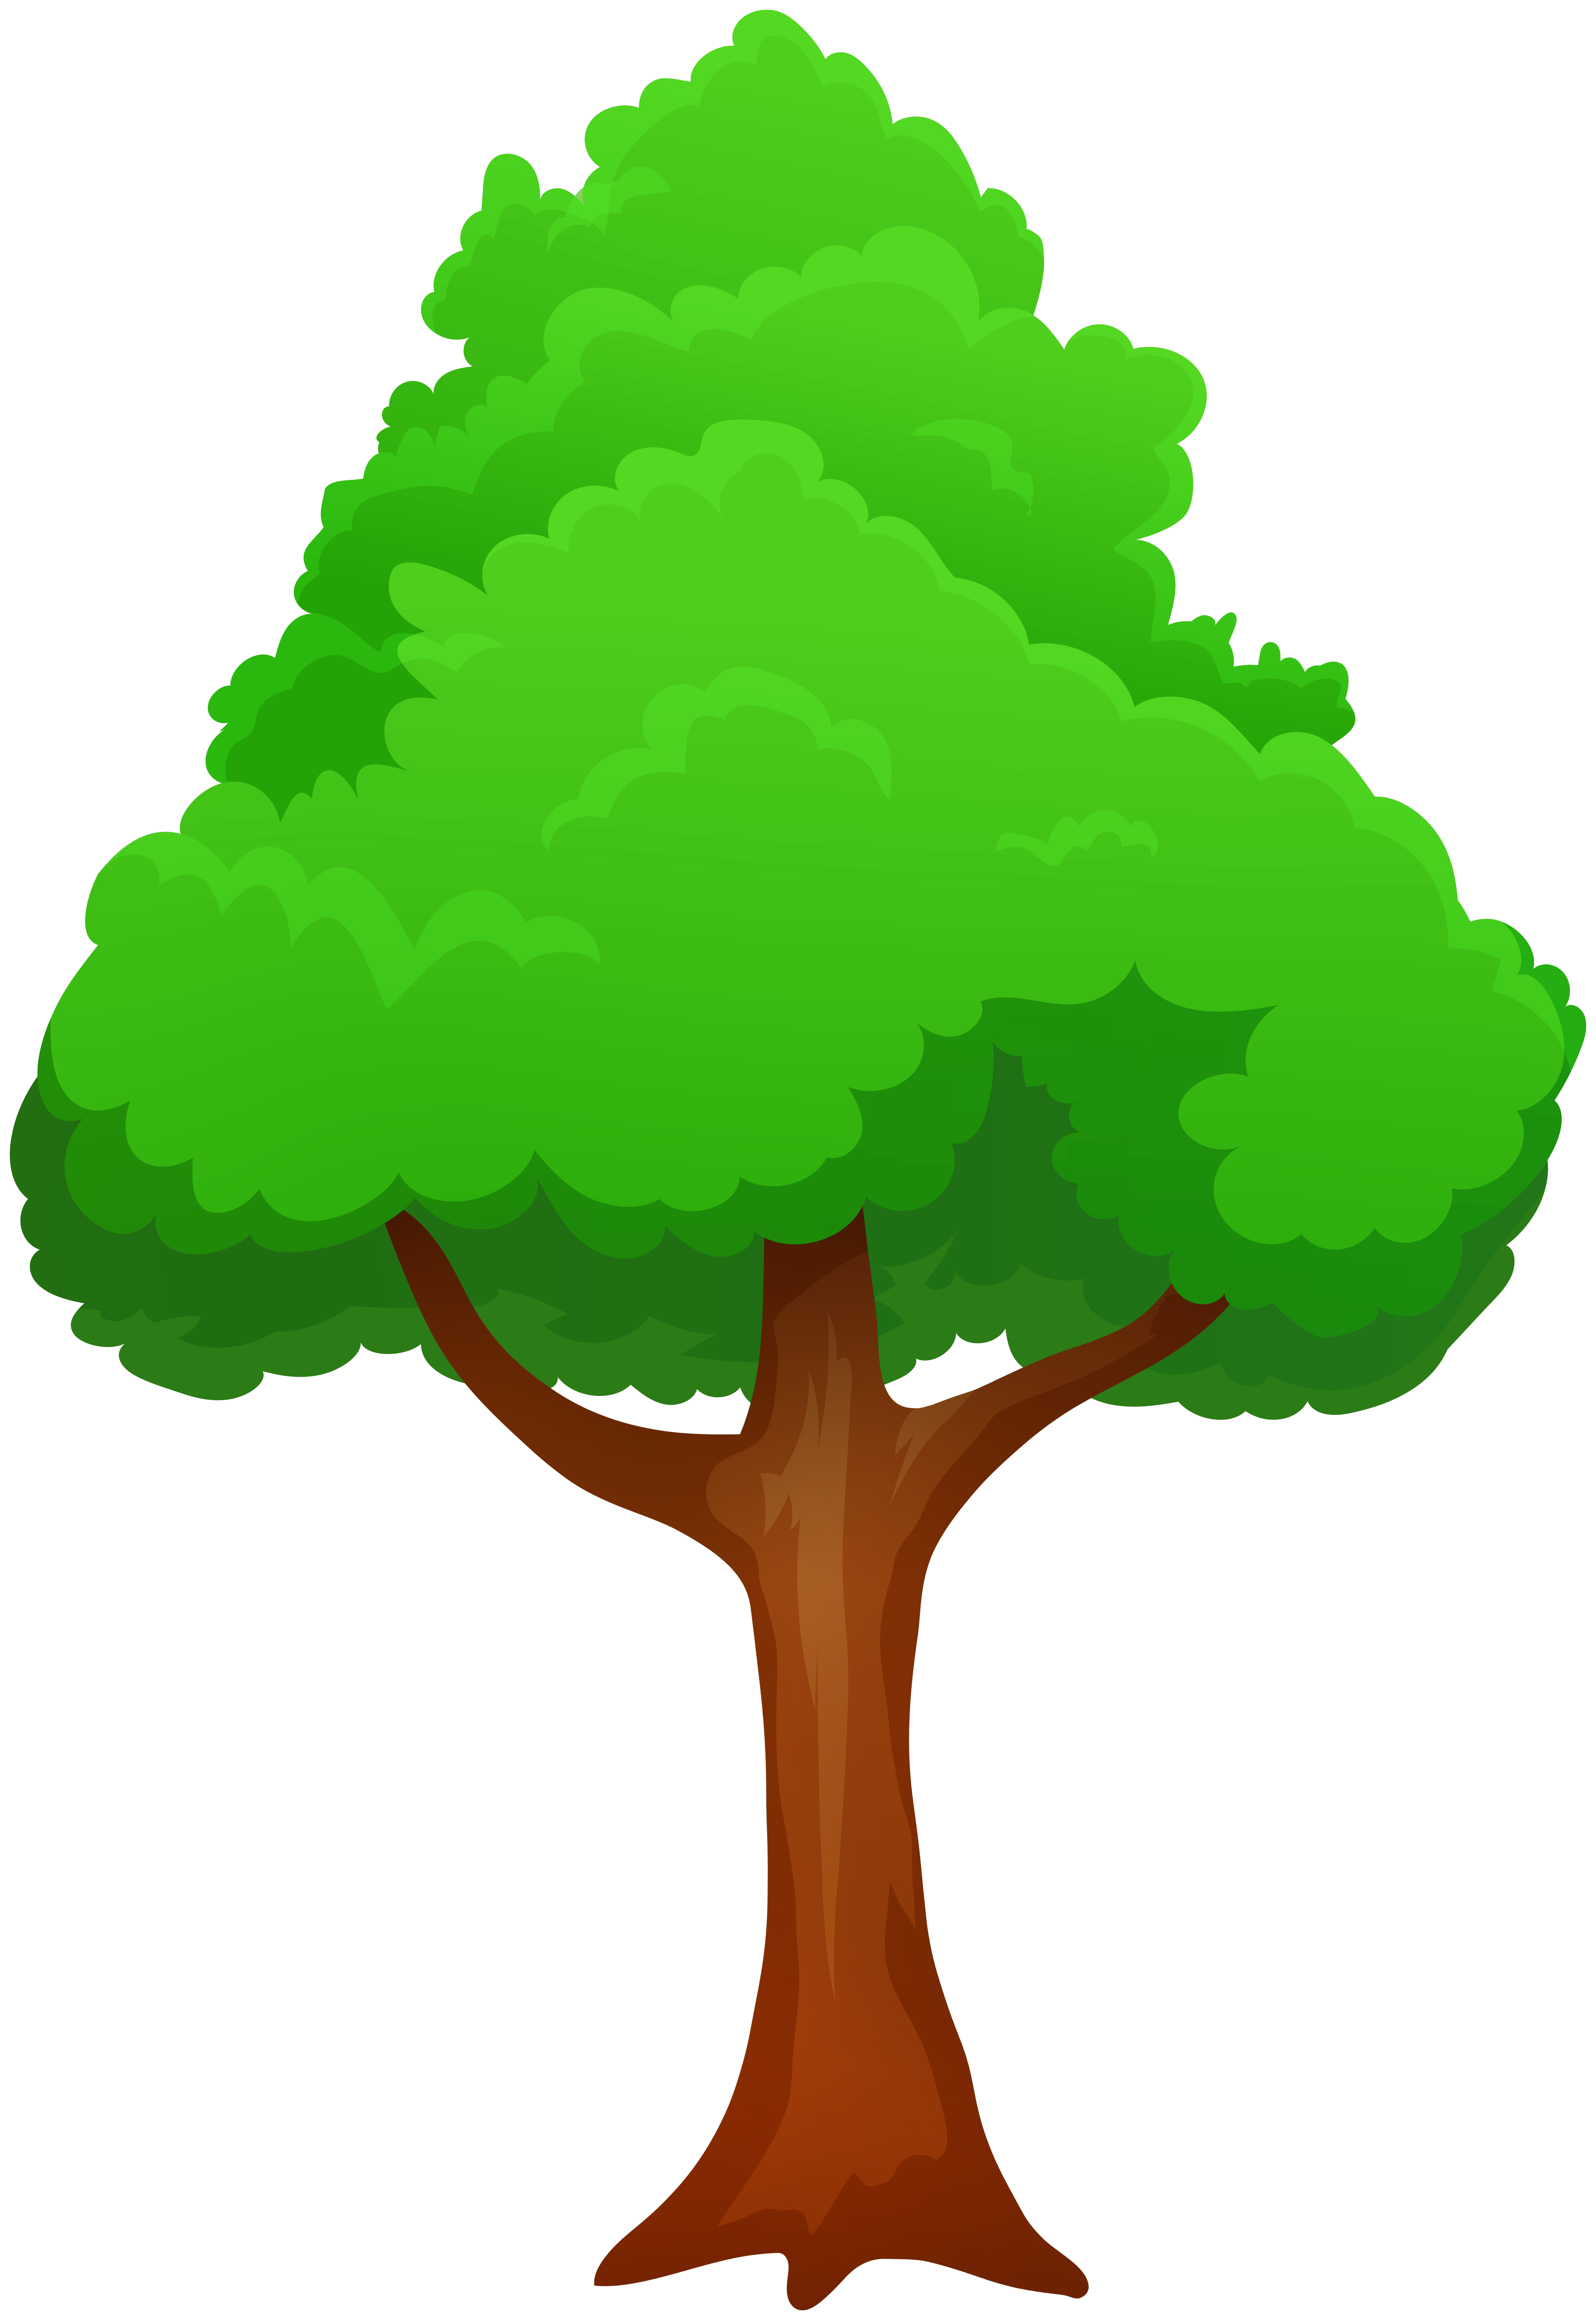 Clipart Images Tree - Tree Clip Art Free Clipart Tree Free Vector ...